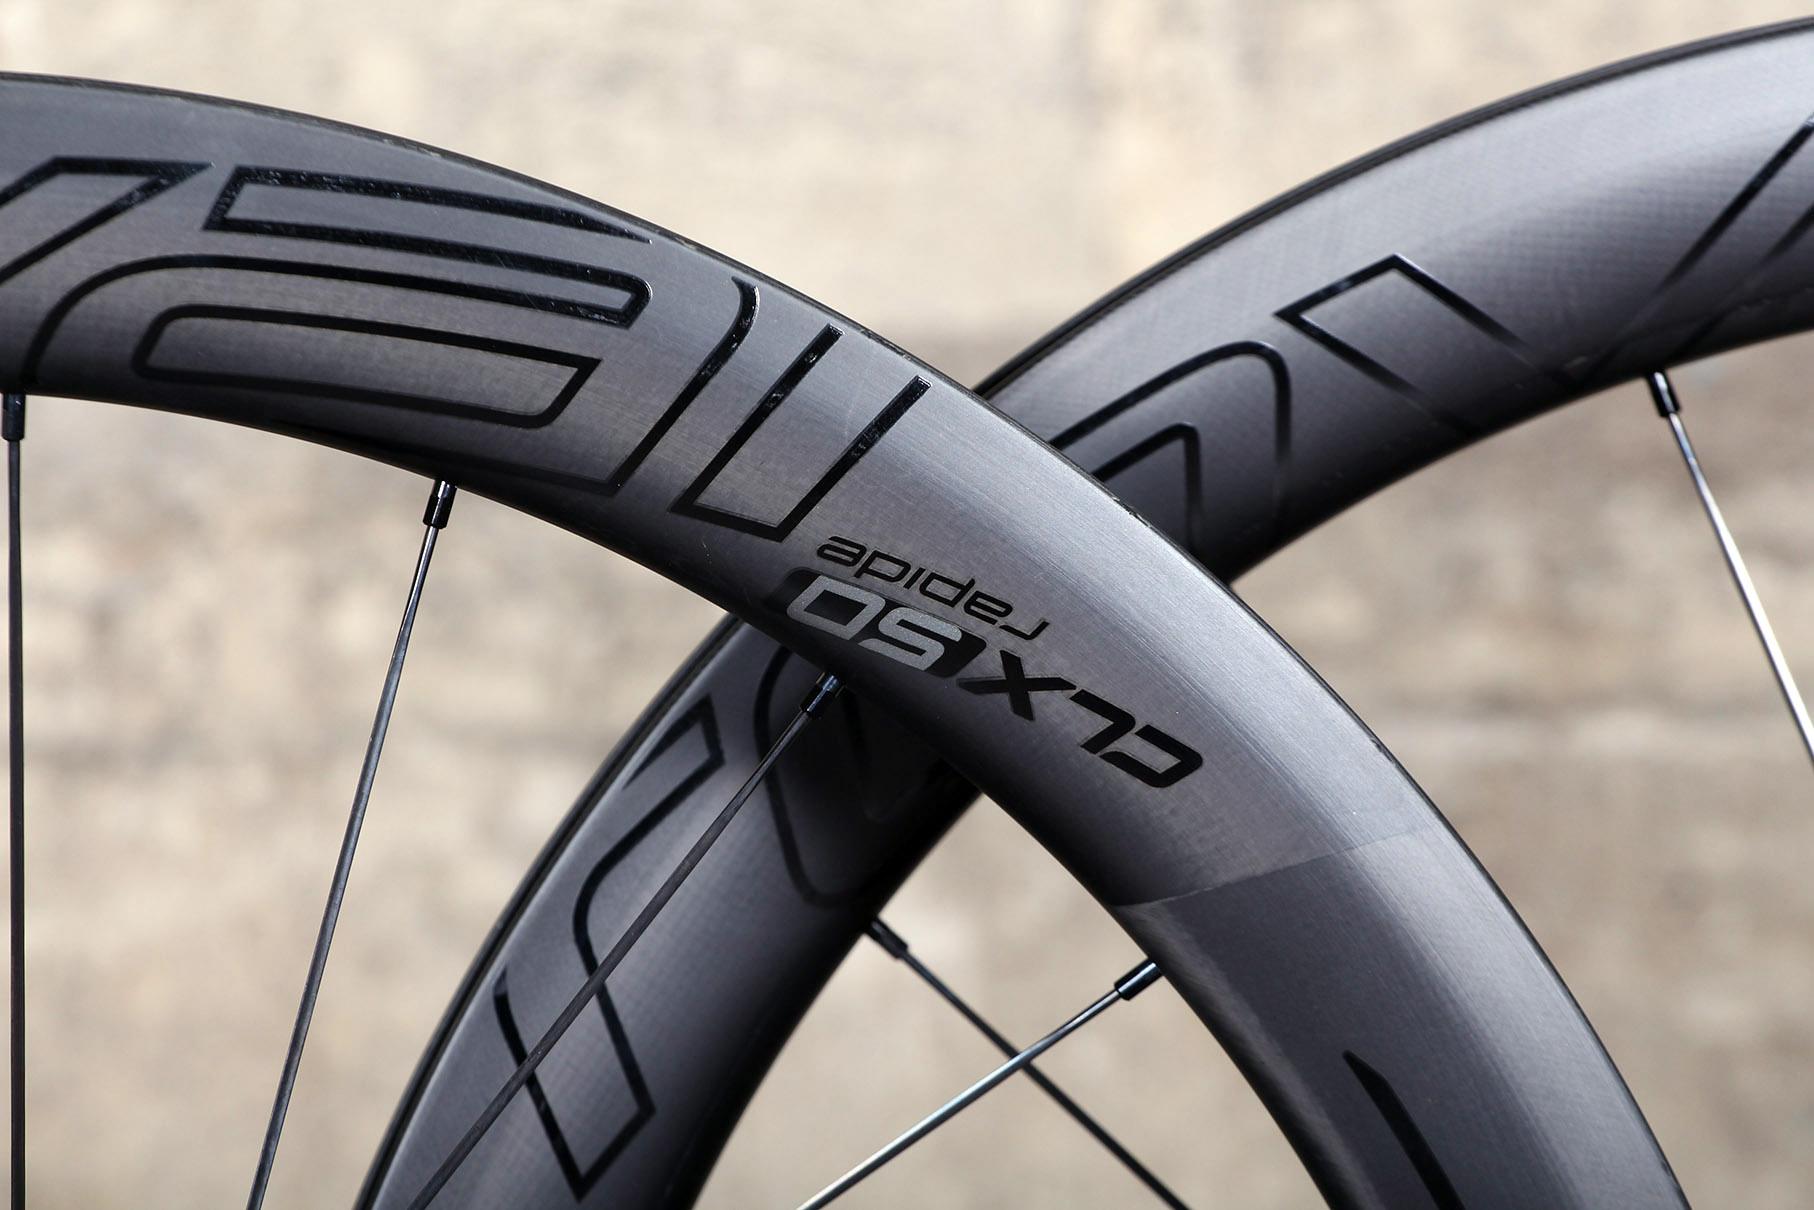 specialized roval cl 50 wheelset